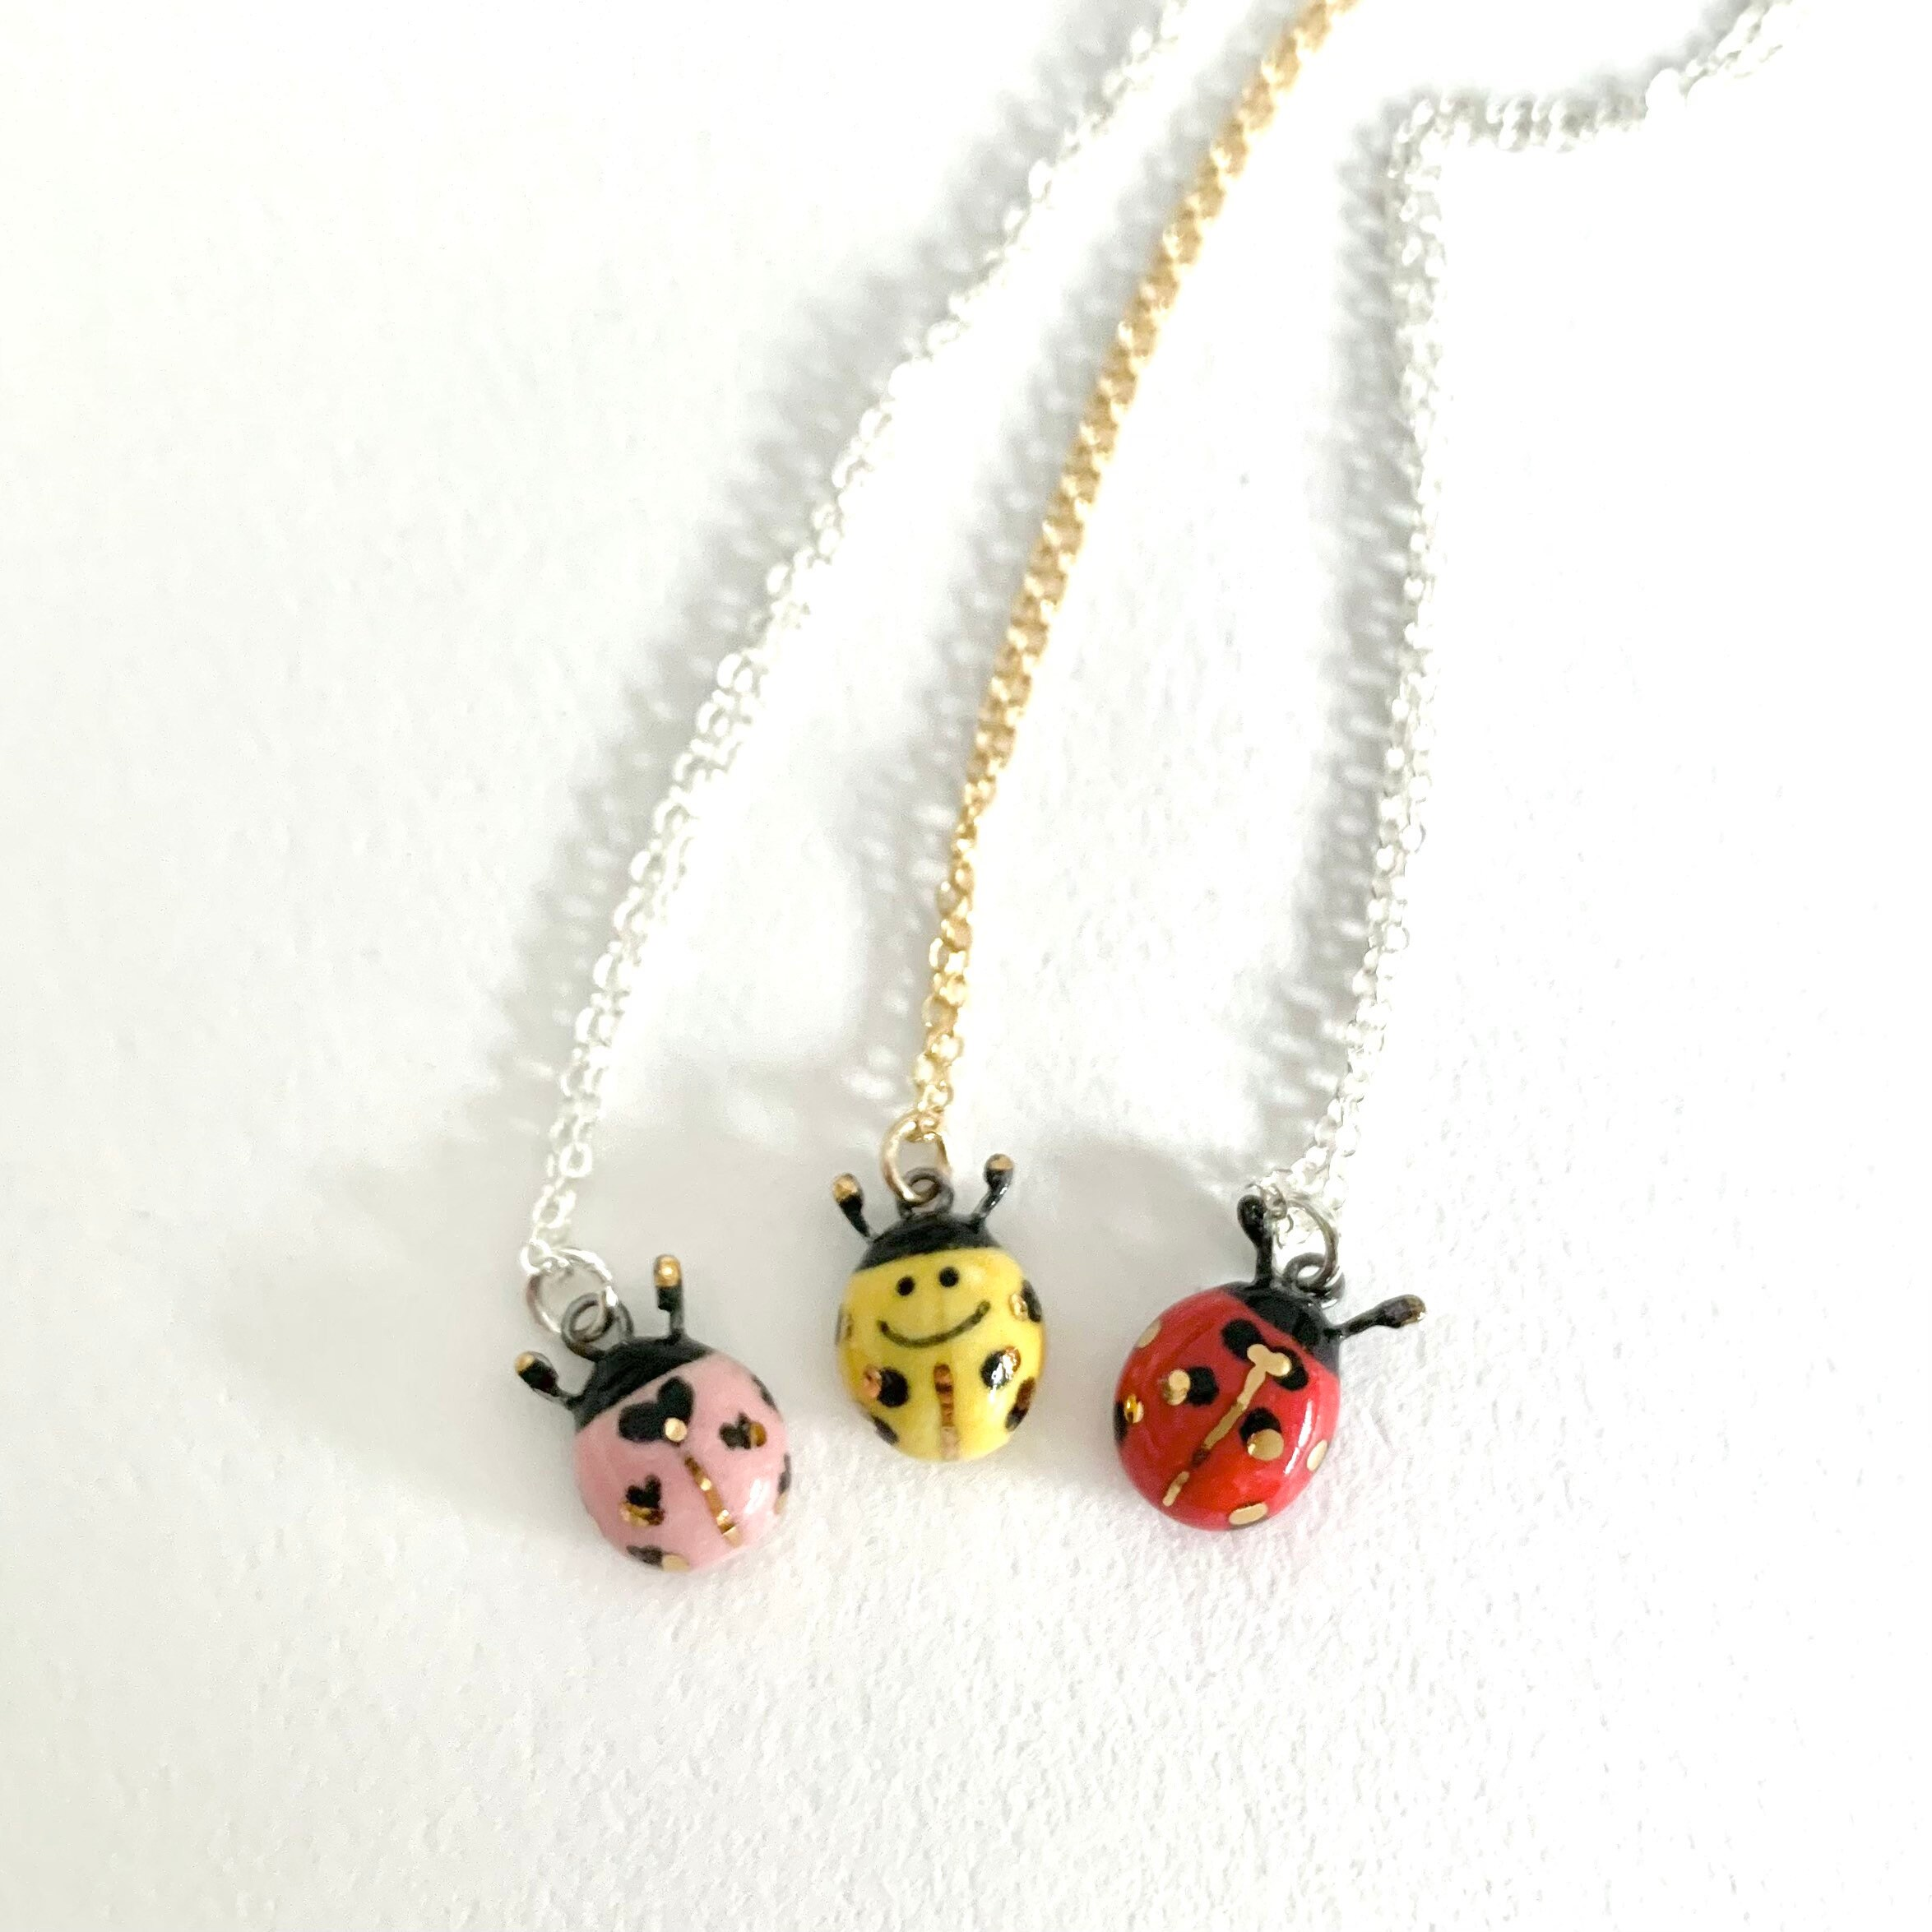 Gold plated necklace Ladybug Jump Ring Necklace